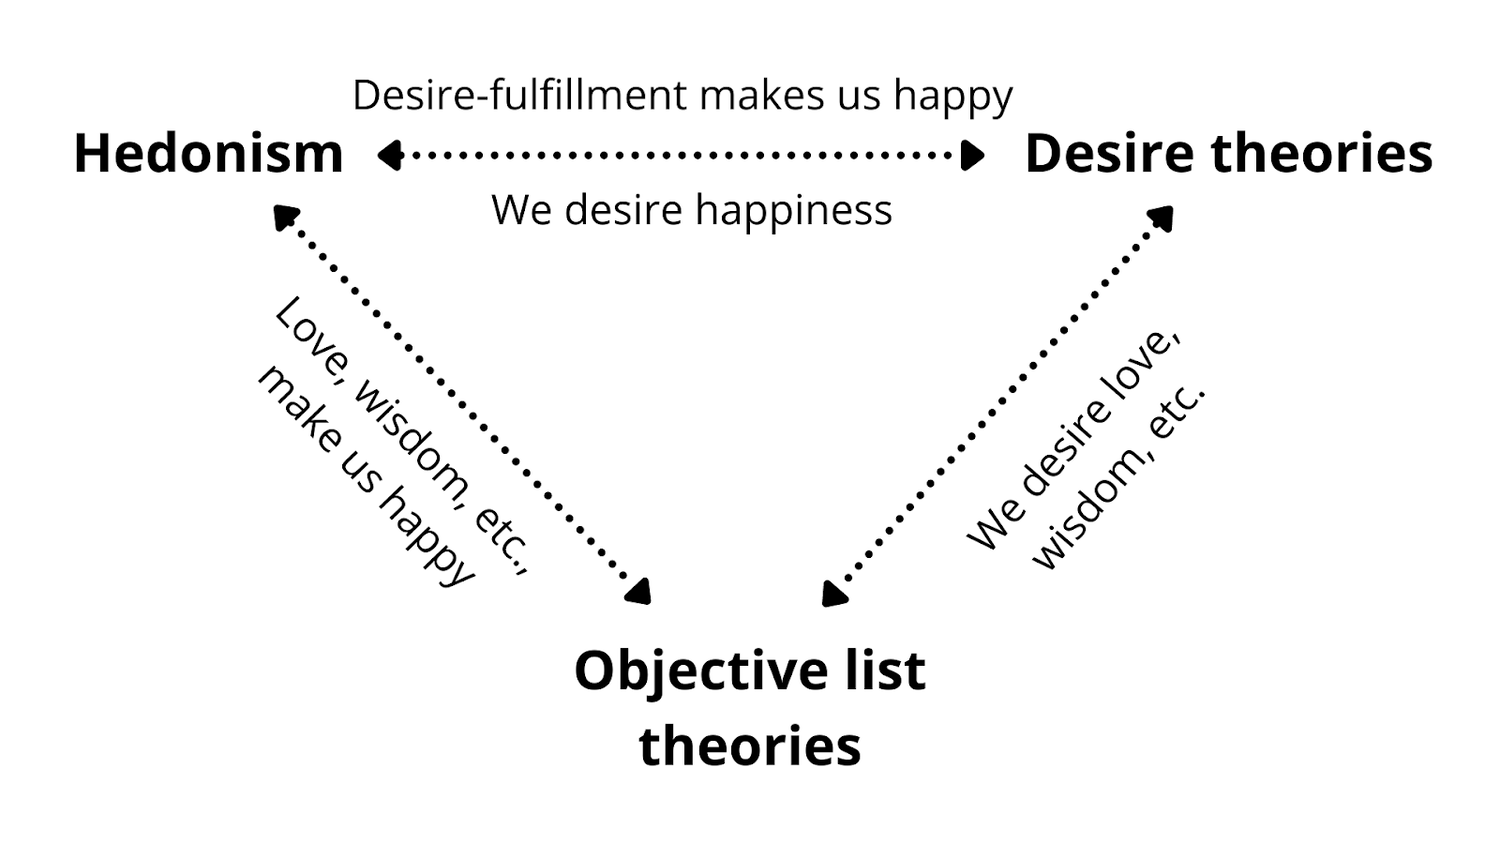 Each theory has a way to justify components of well-being